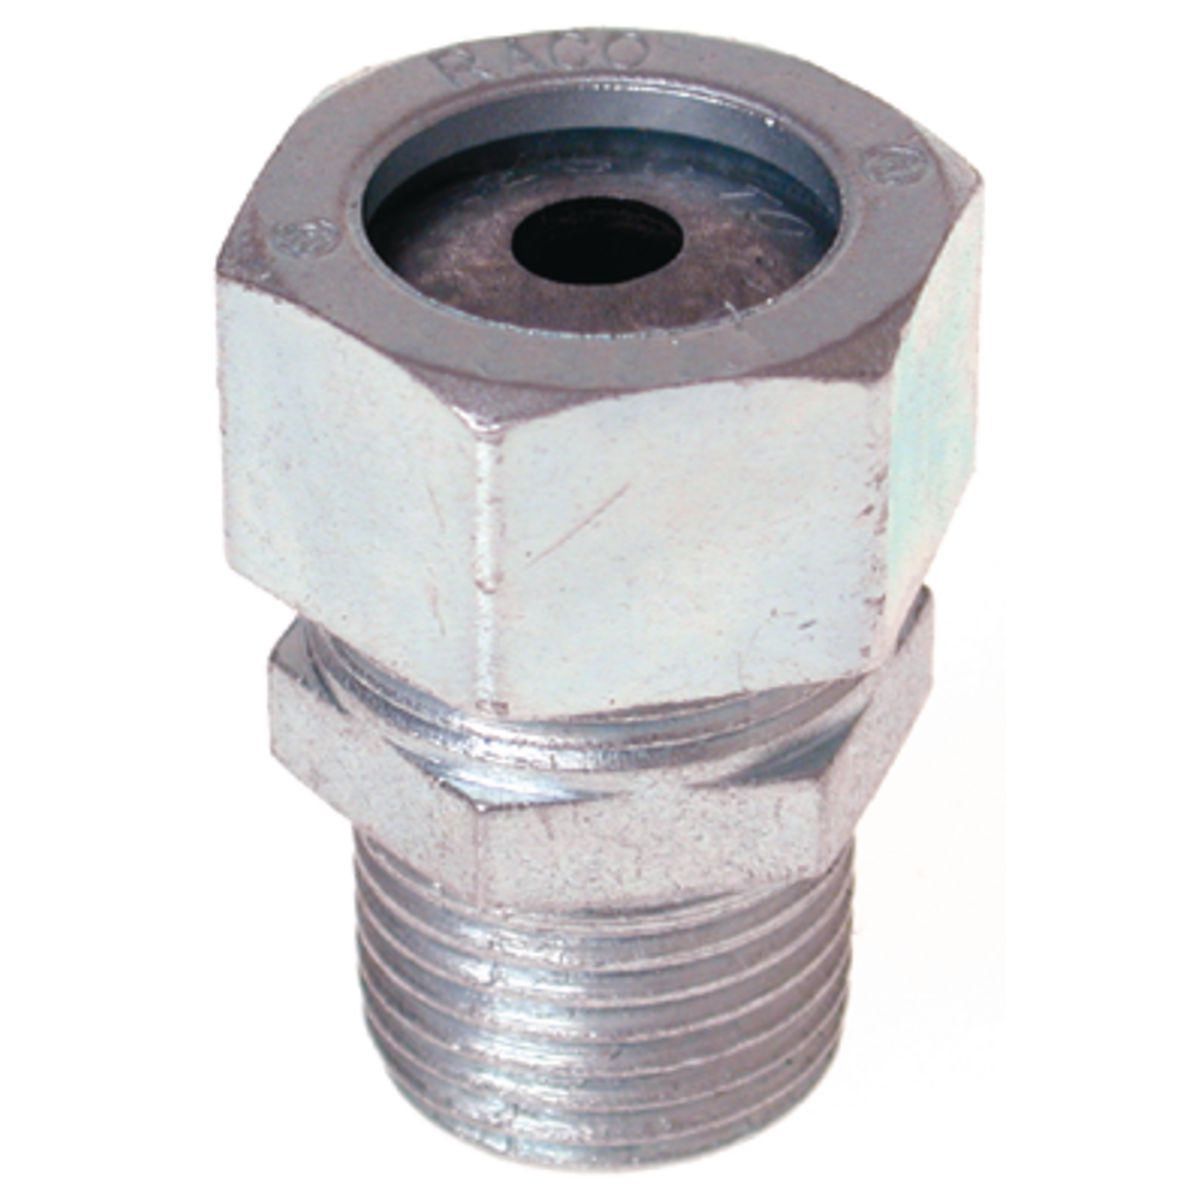 Crouse-Hinds 11 Conduit Locknut, 1/2 in, For Use With Rigid/IMC Conduit, Steel